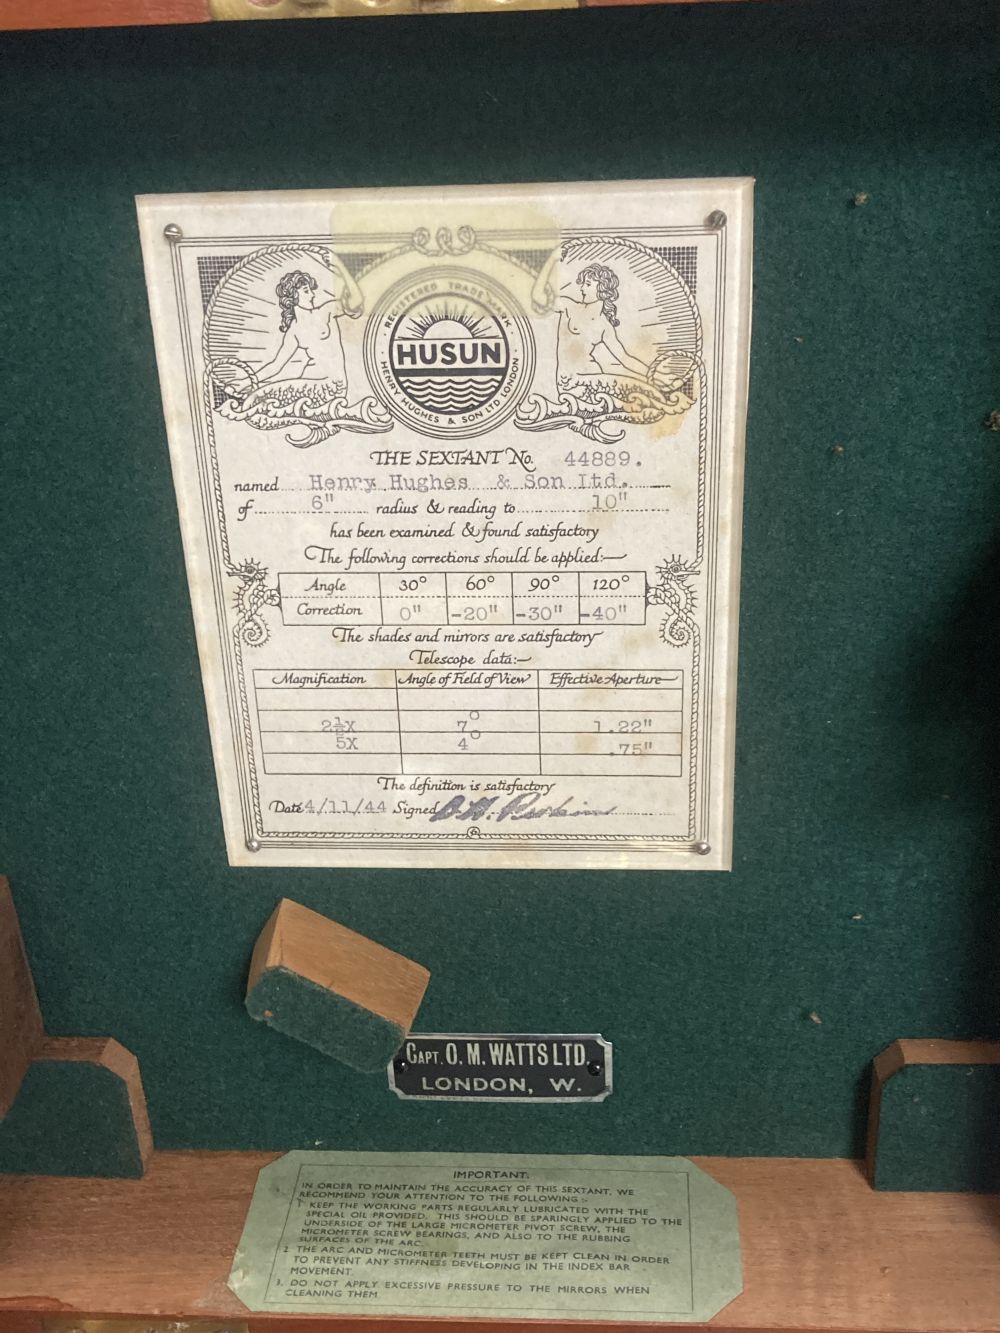 A cased Husun sextant by Henry Hughes & Son Ltd, no 44889, test certificate dated Nov. 44